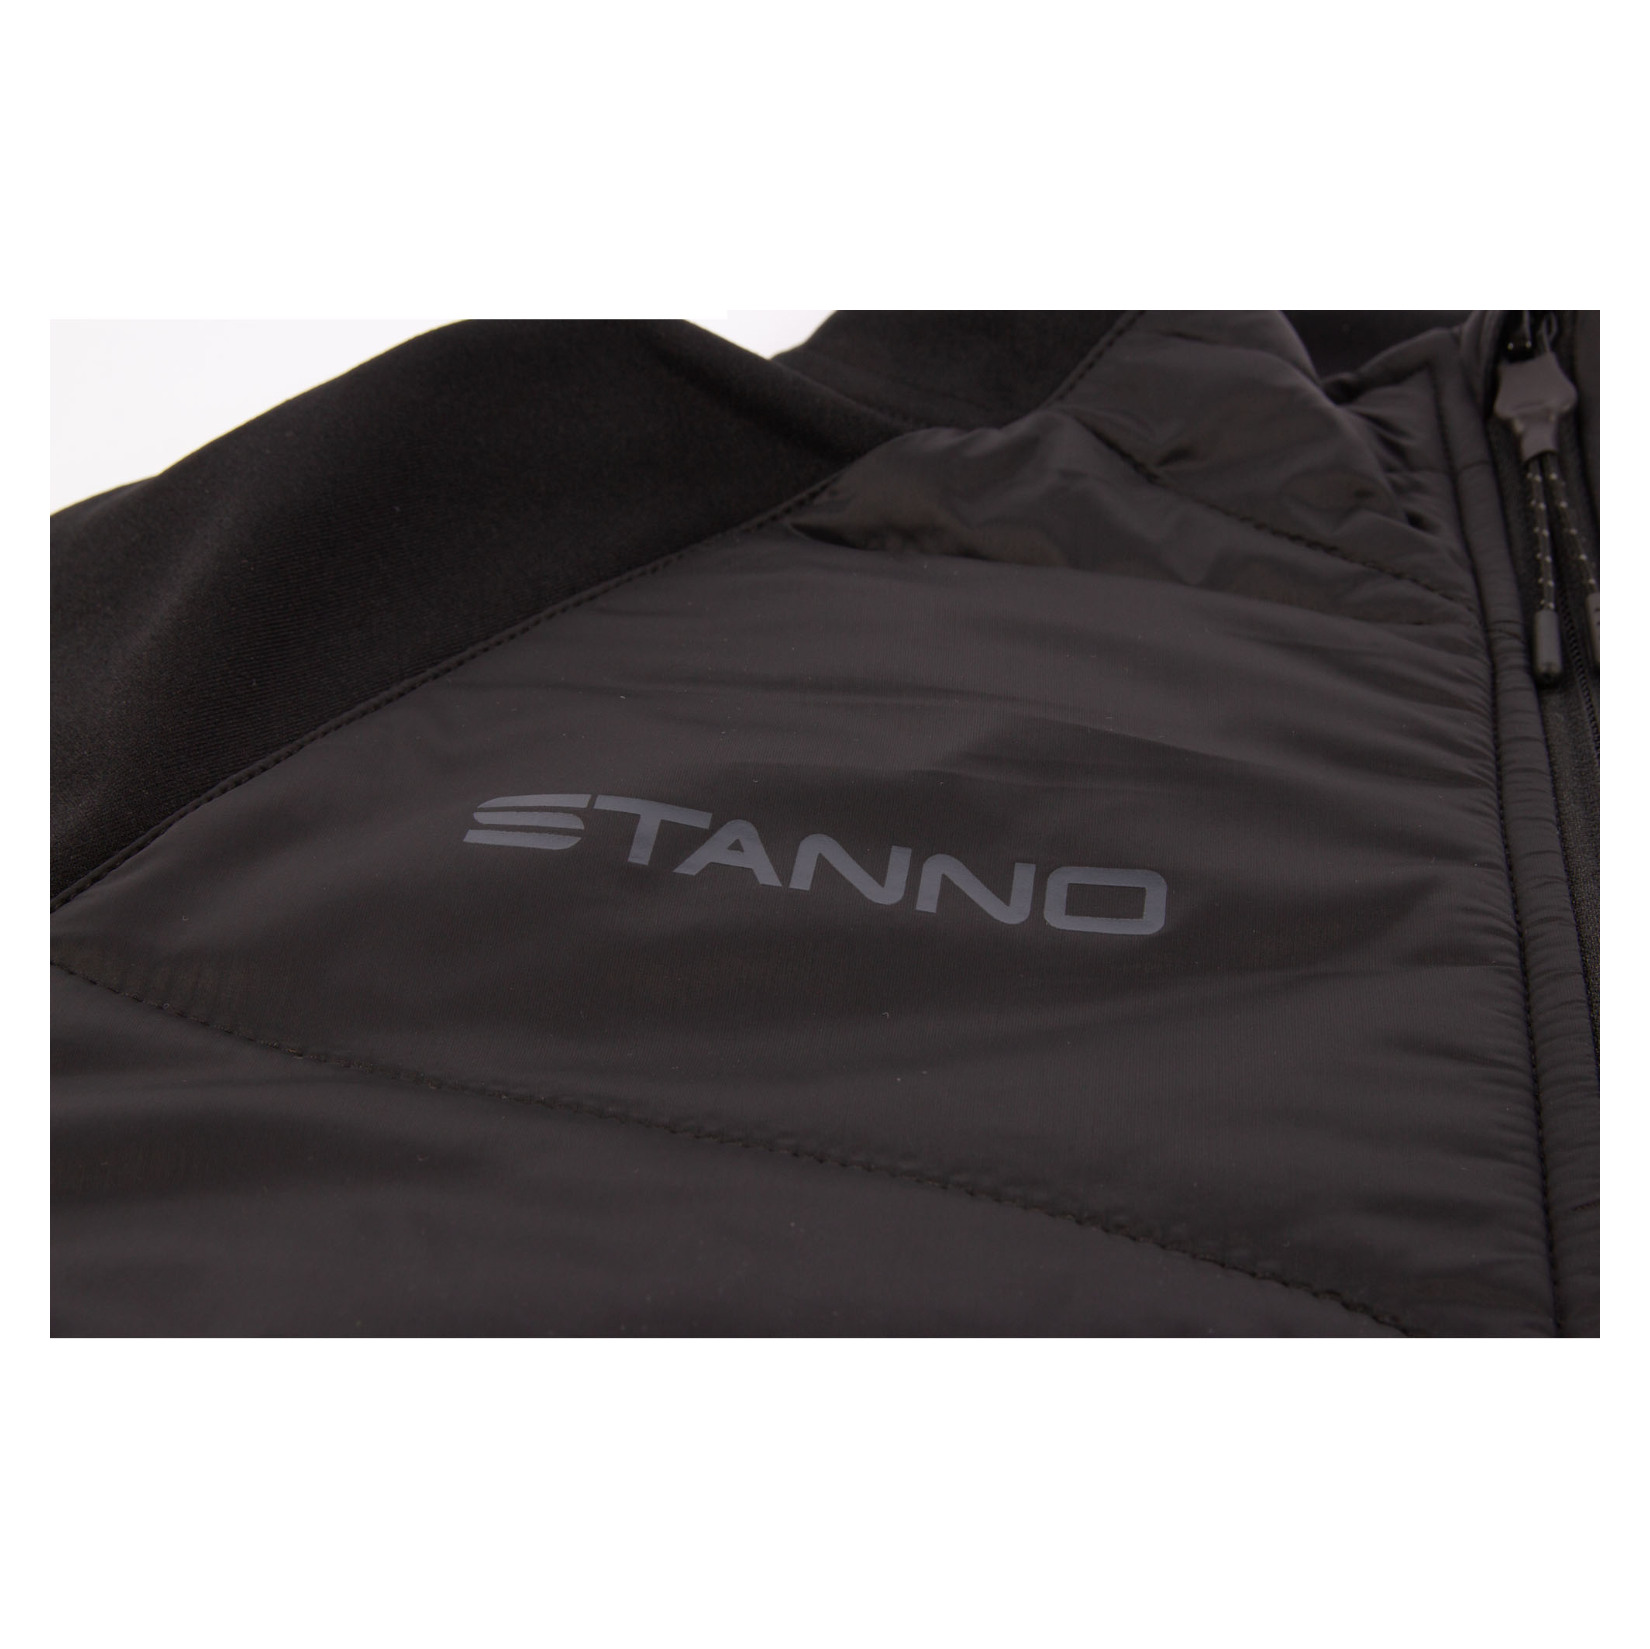 Stanno Functionals Thermal Top